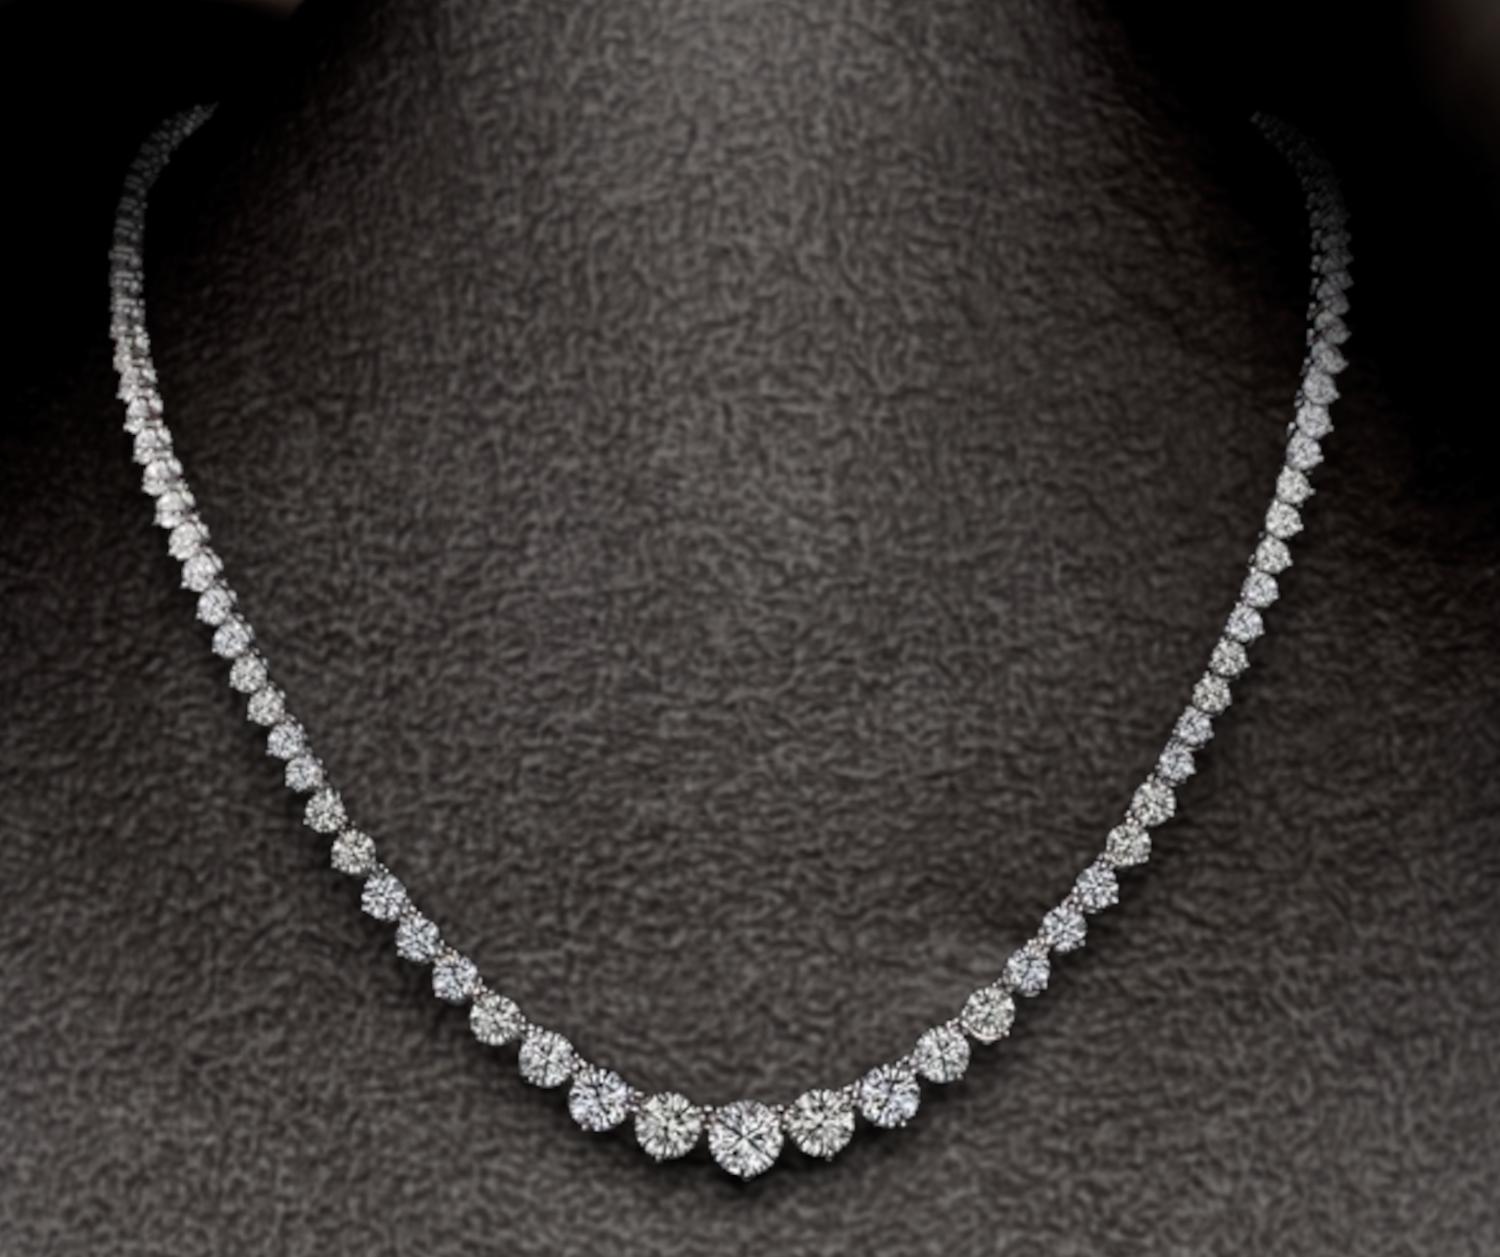 Introducing the Riviera Necklace, a captivating creation that embodies elegance and luxury. This exquisite piece is adorned with 16 carats of graduated diamonds, expertly arranged to create a seamless flow of brilliance around the neck. Spanning 16